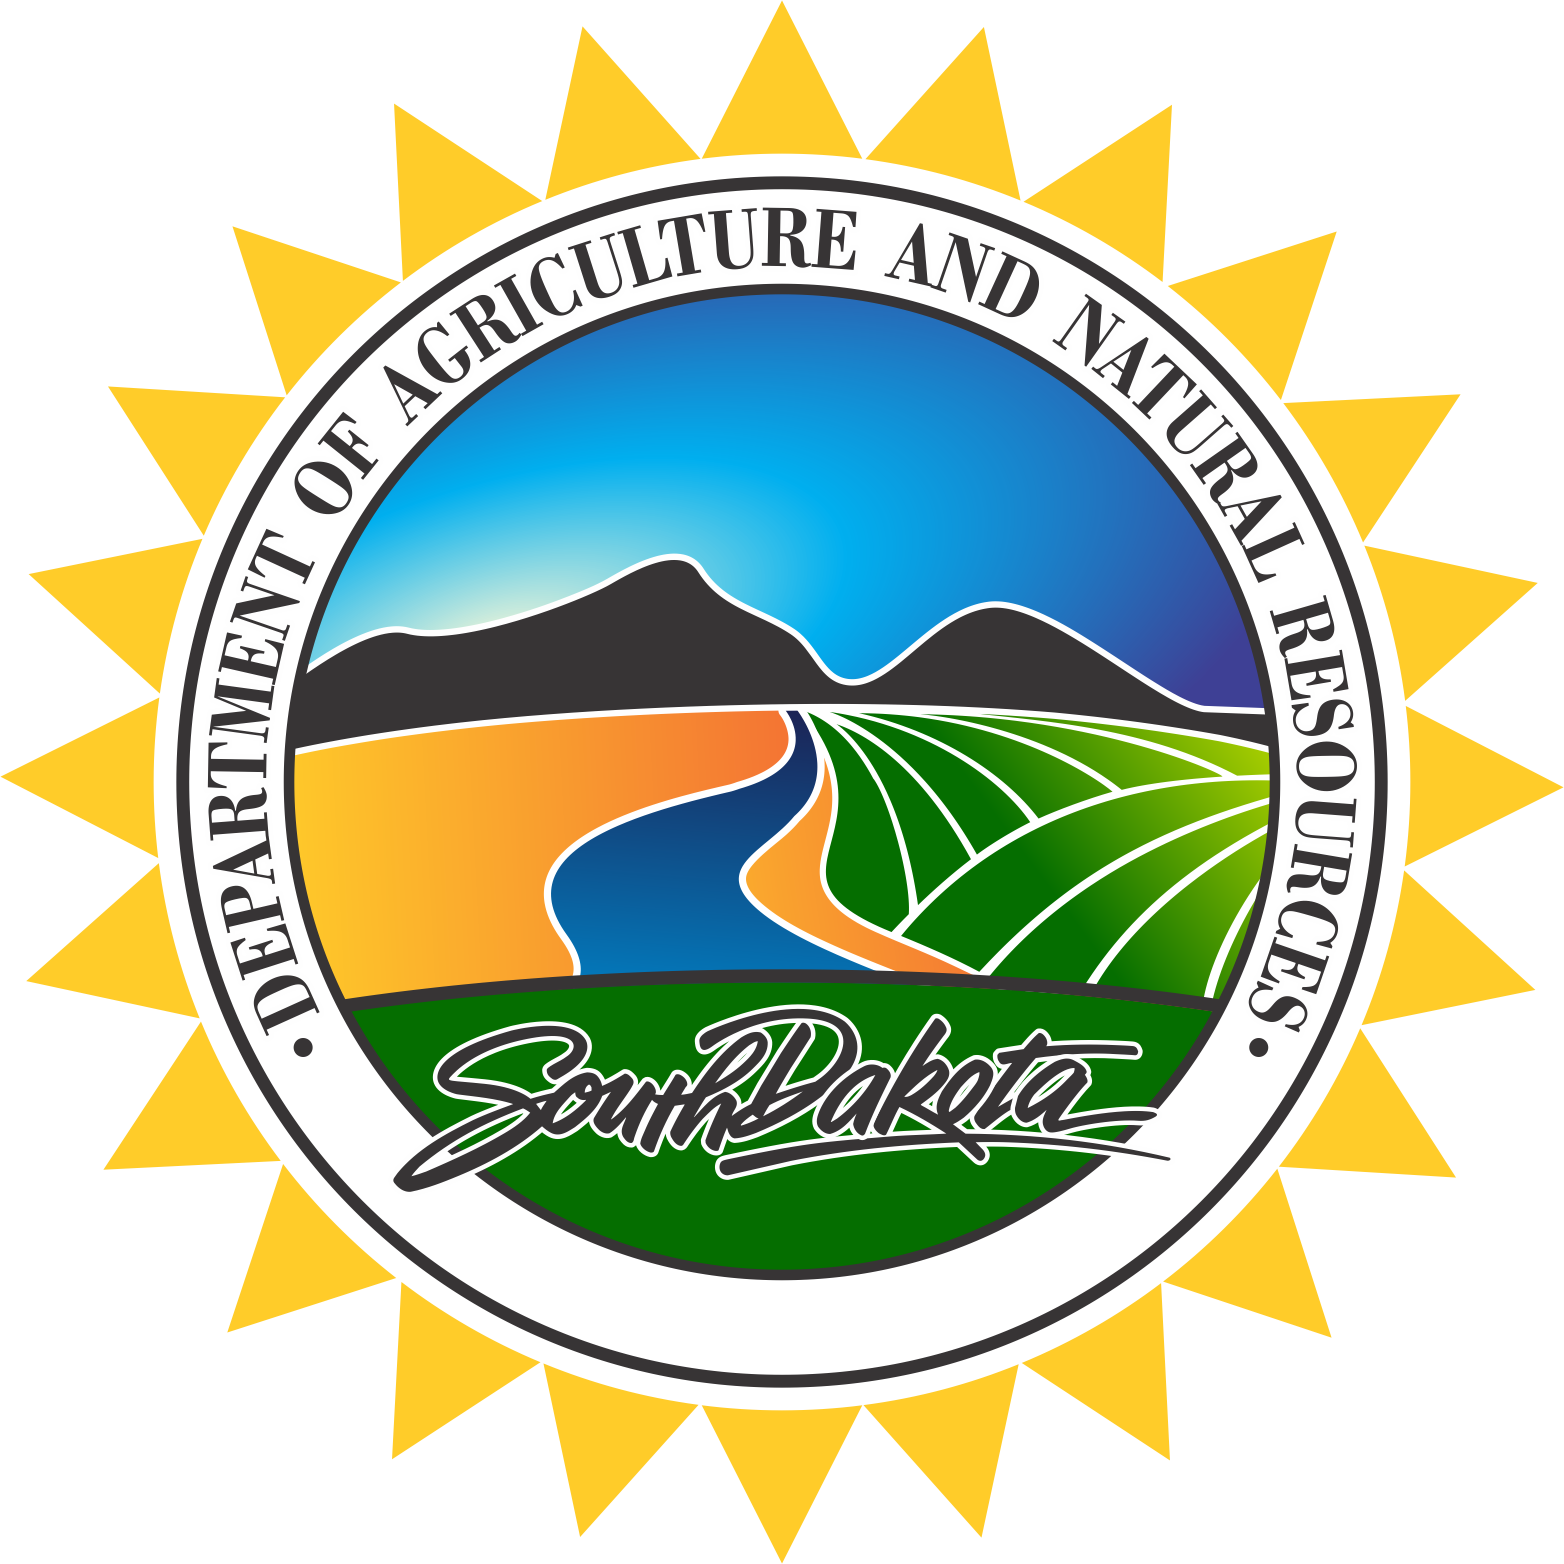 Department of Agriculture and Natural Resources